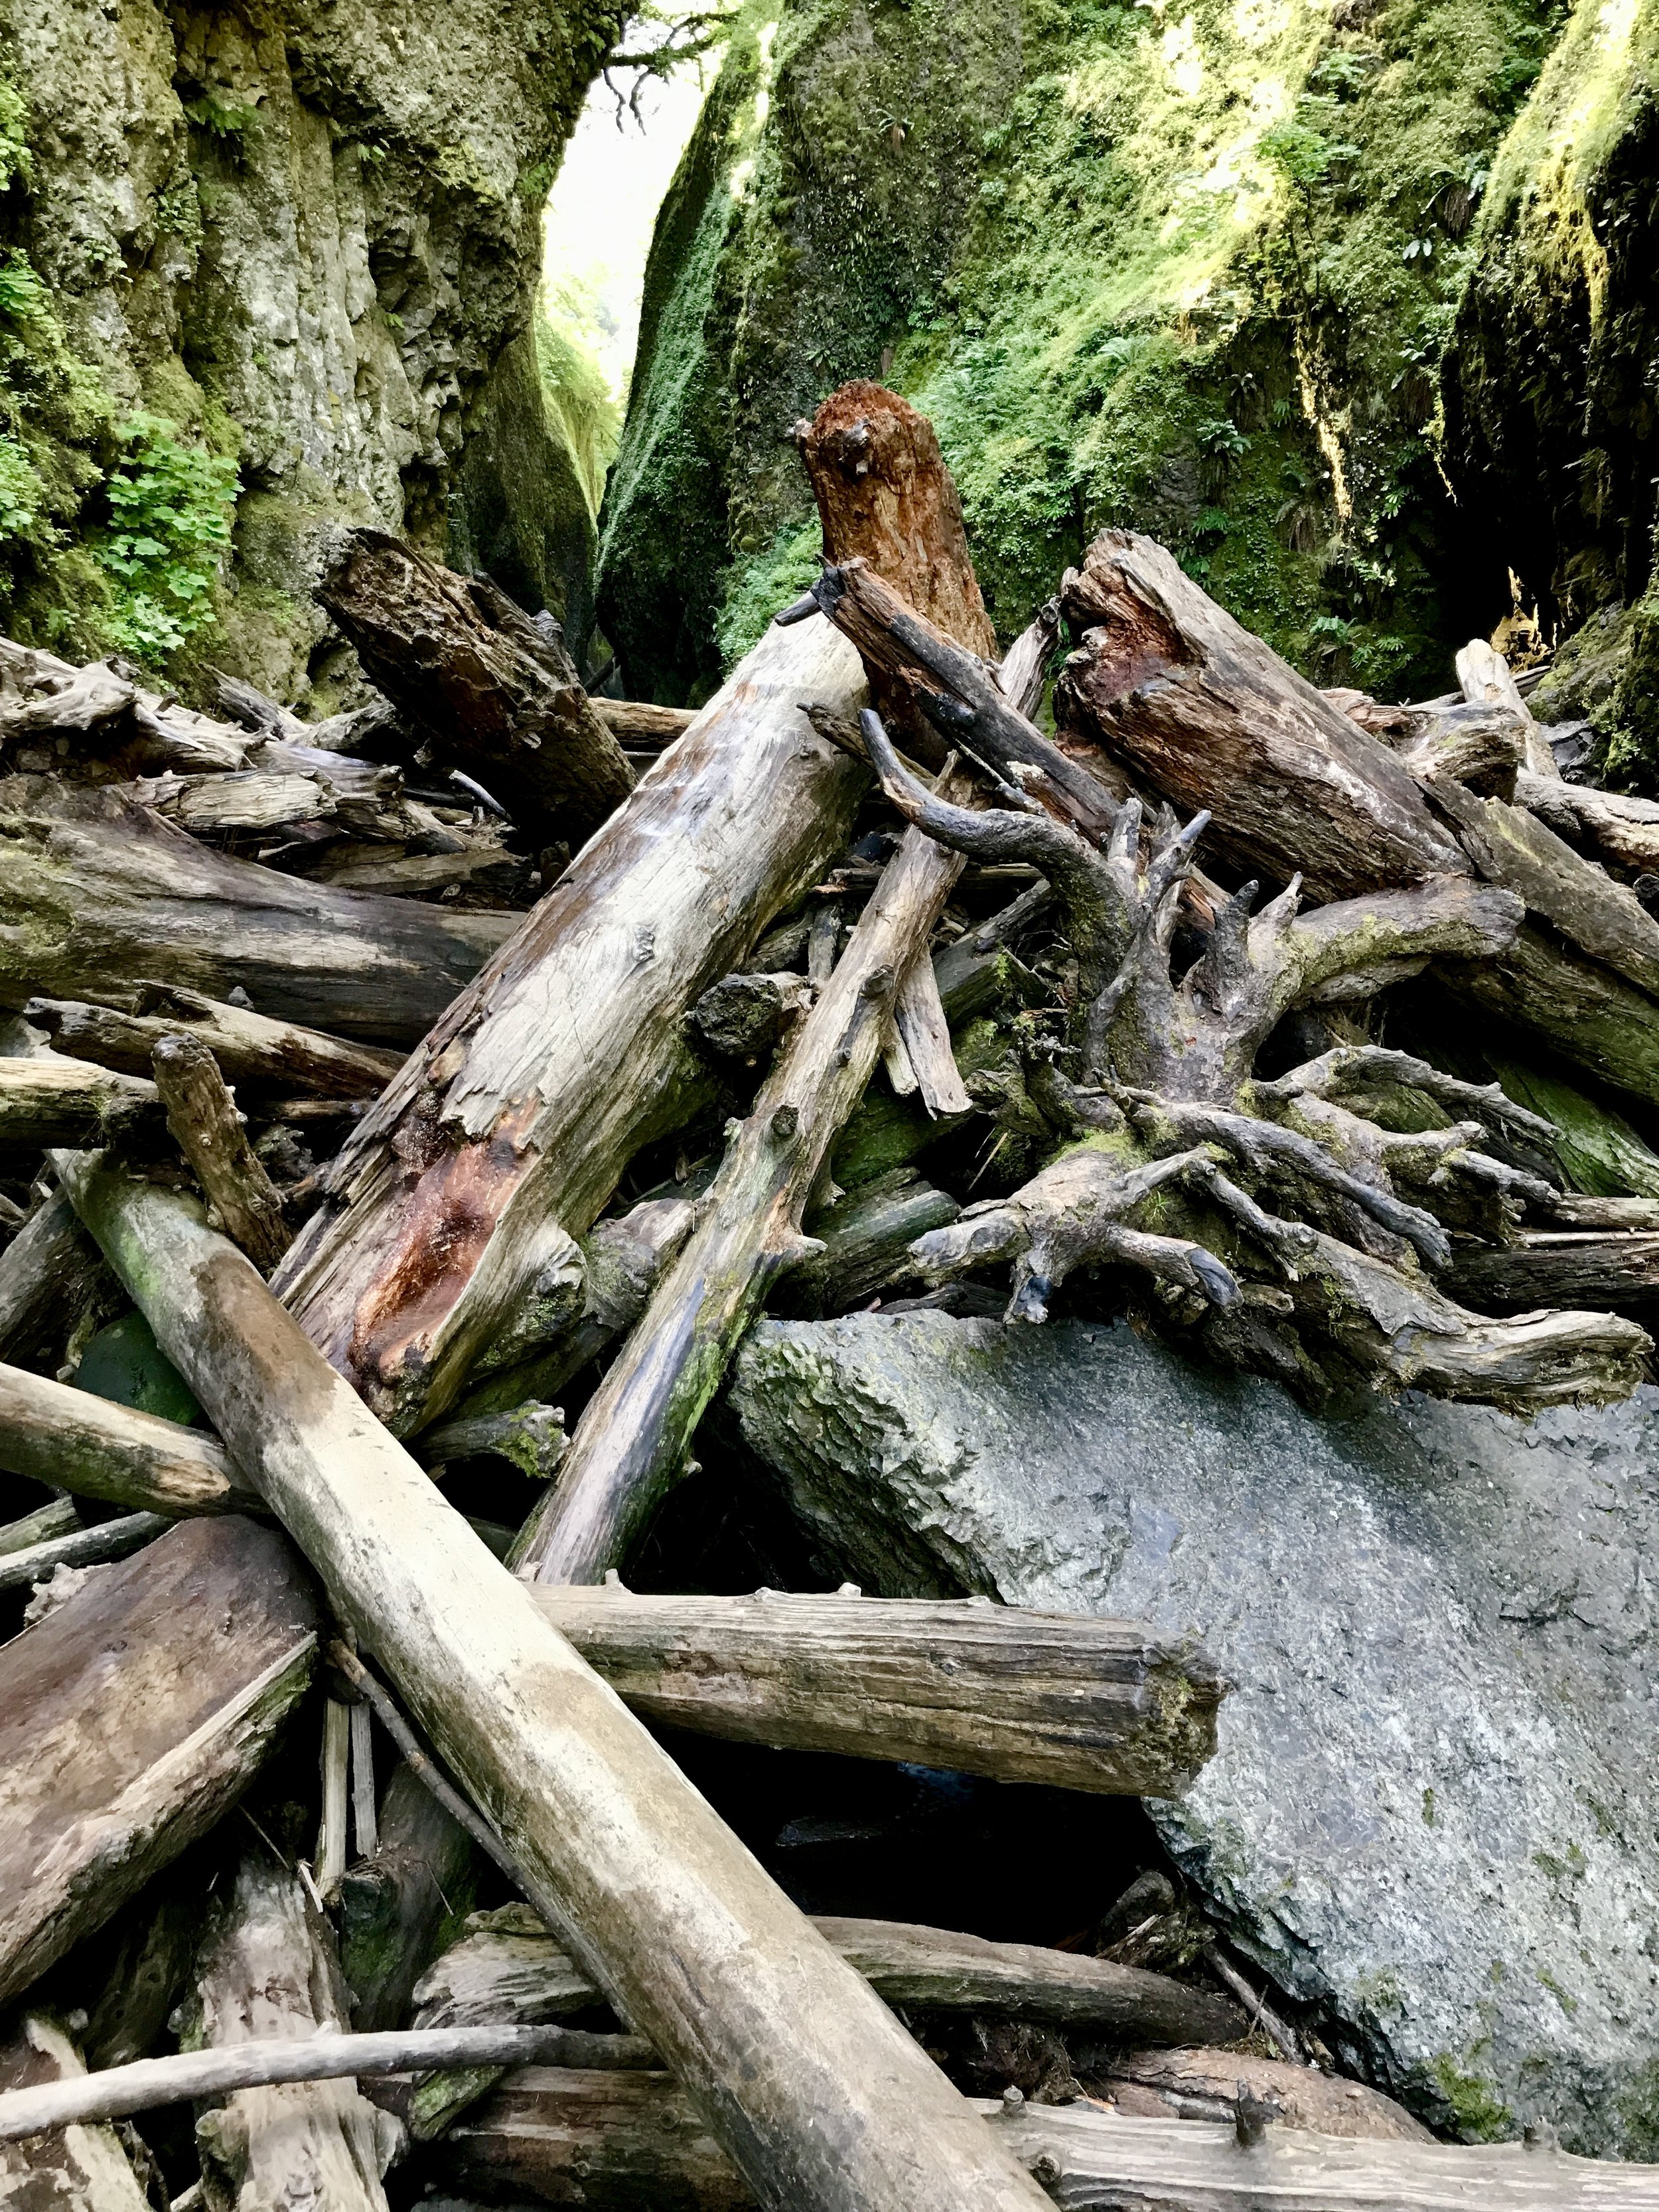 Log Jam at Oneonta Gorge - Exercise Caution